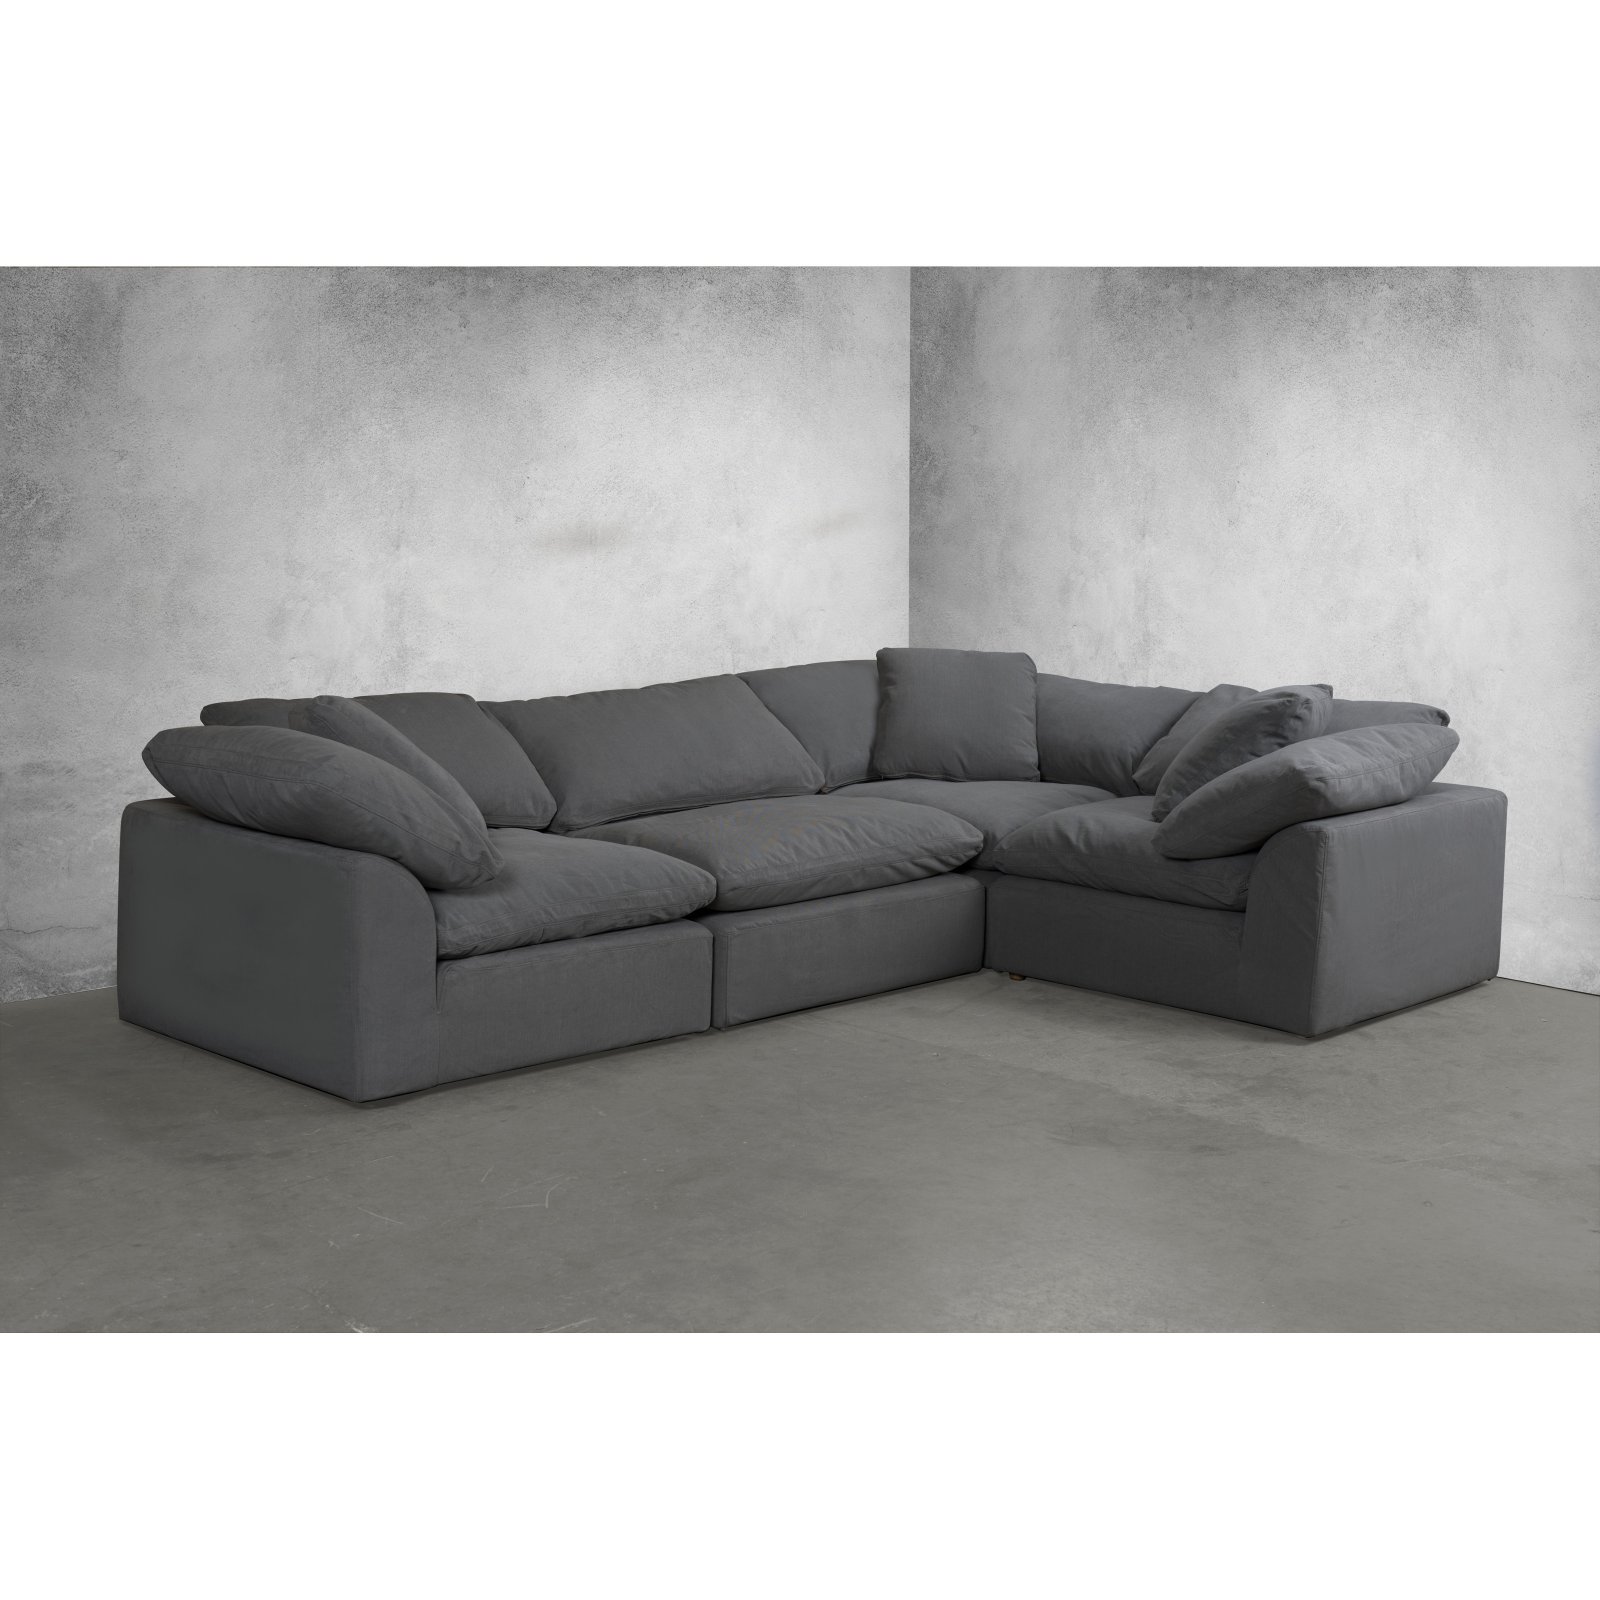 Sunset Trading 4 Piece Slipcovered Modular L Shaped Sectional Sofa - image 3 of 4